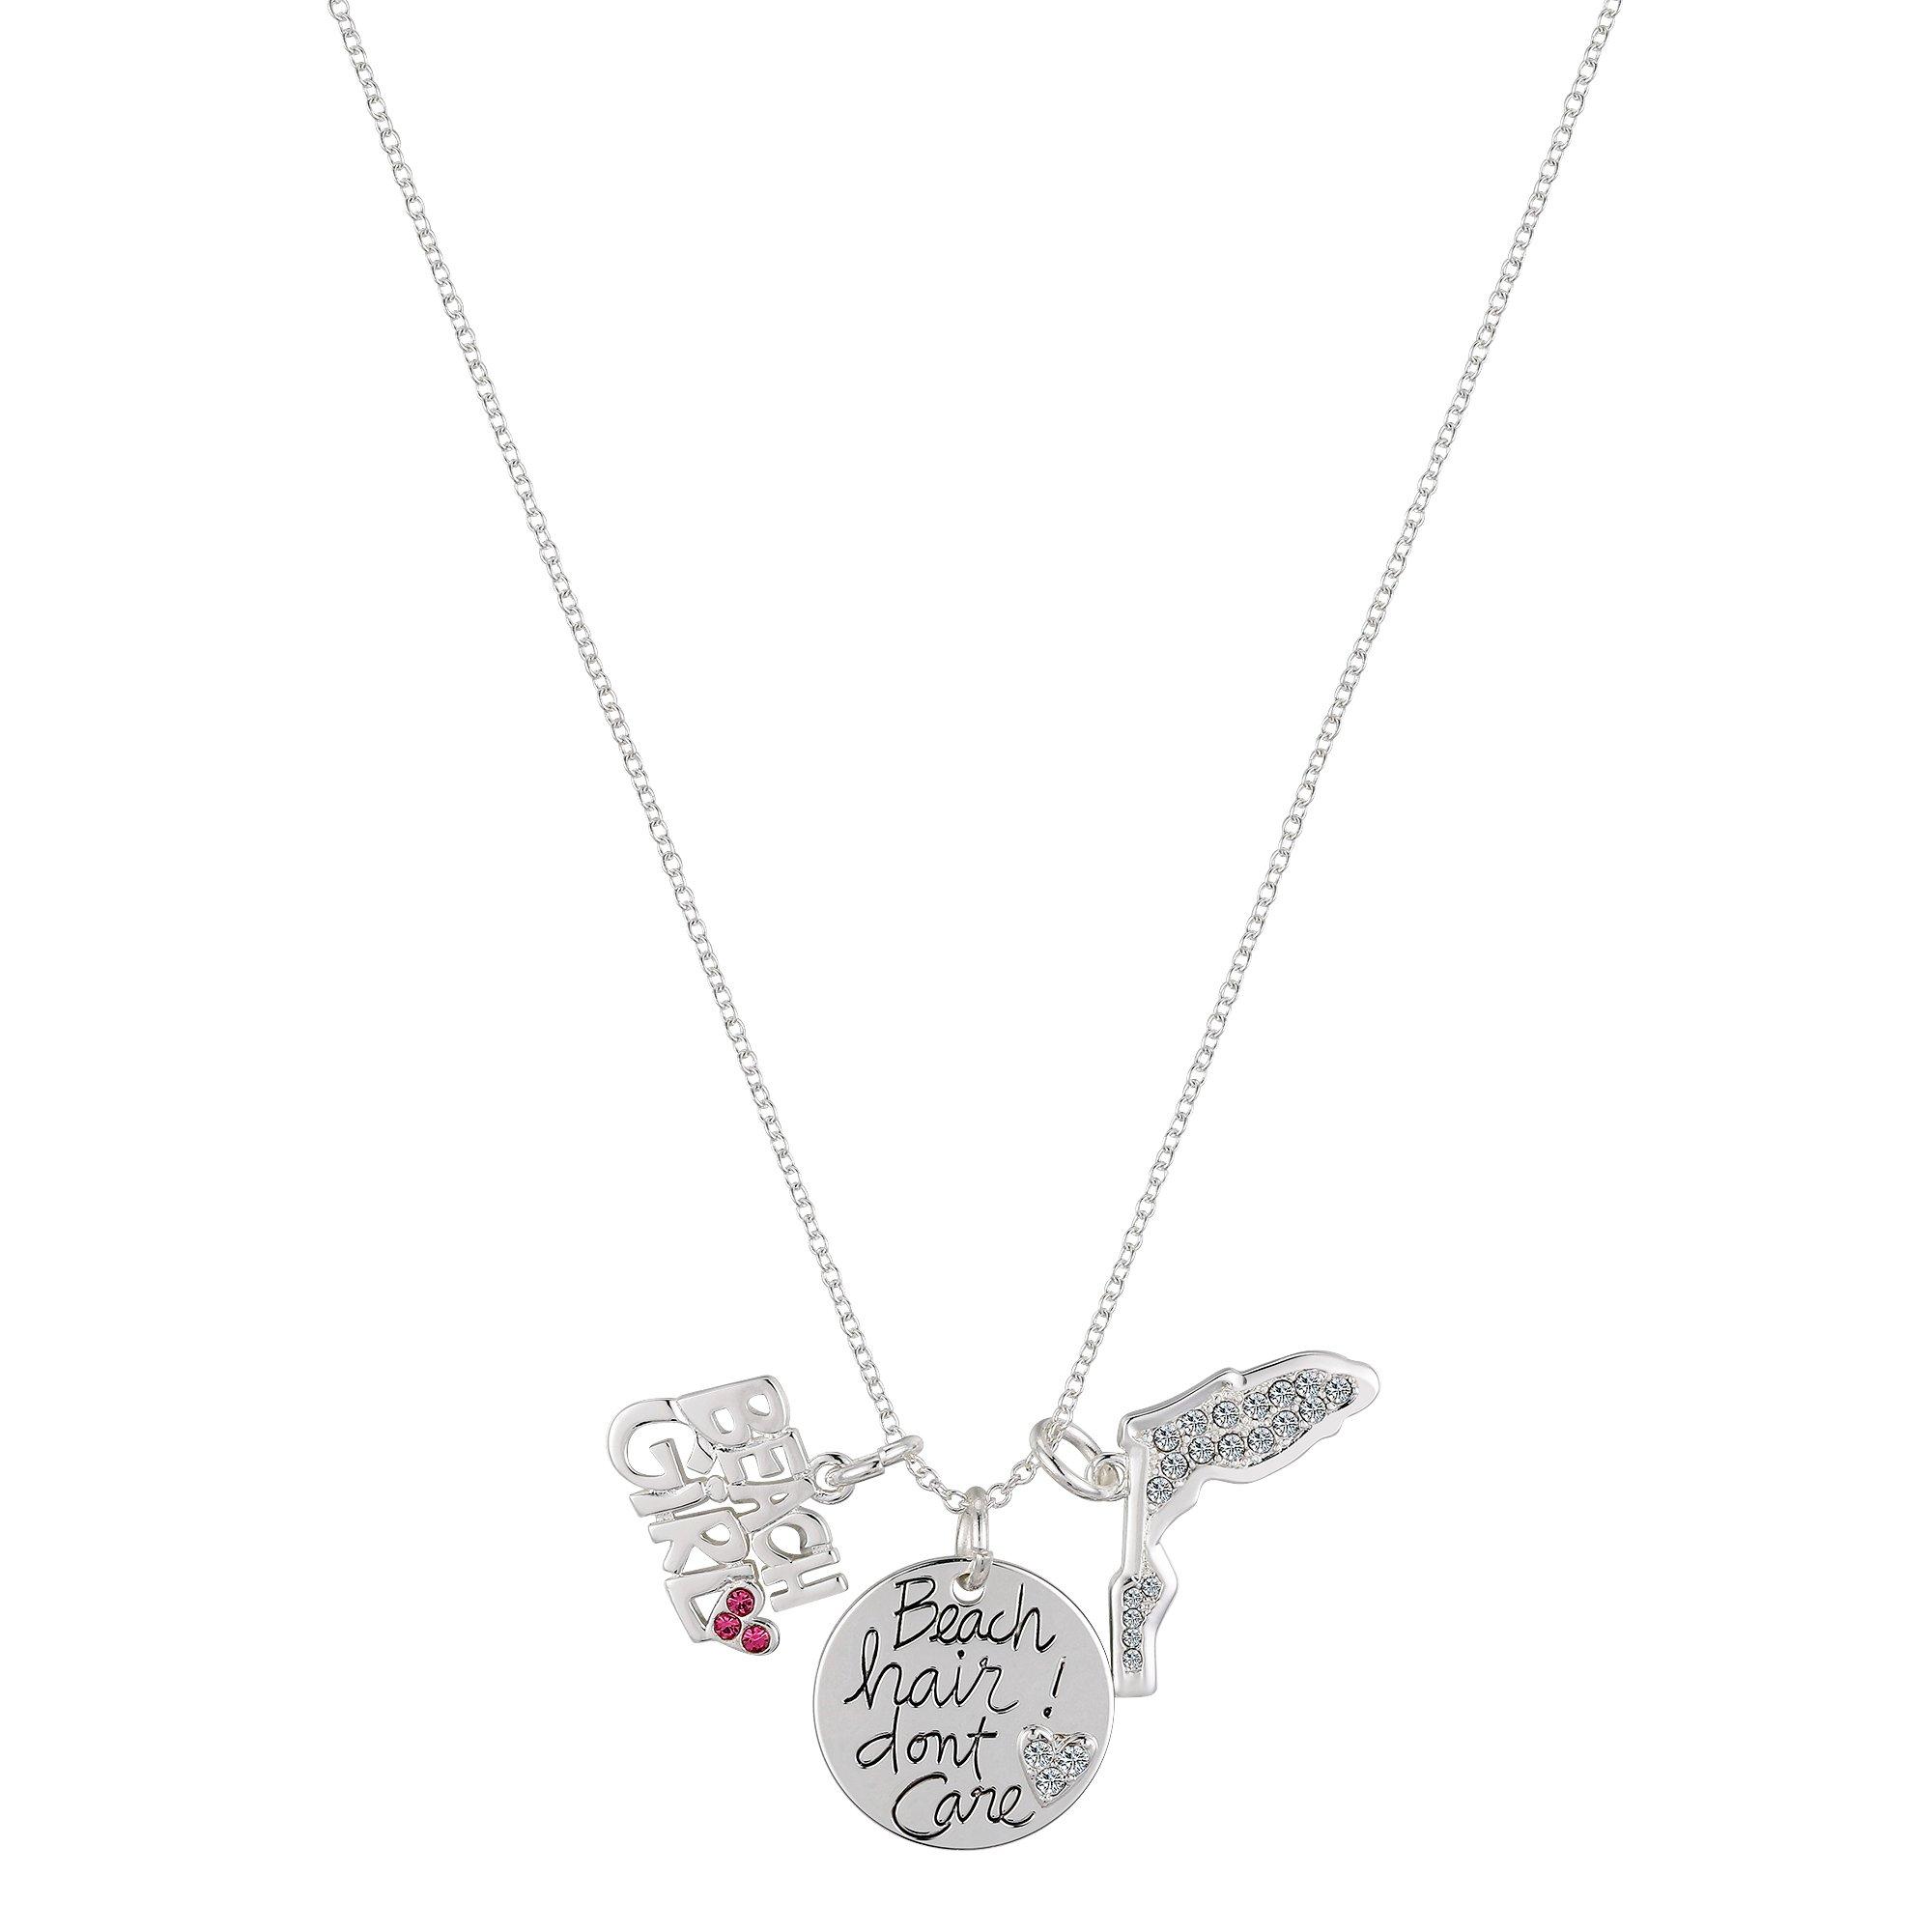 Beach Girl Charms Silver Plated Necklace